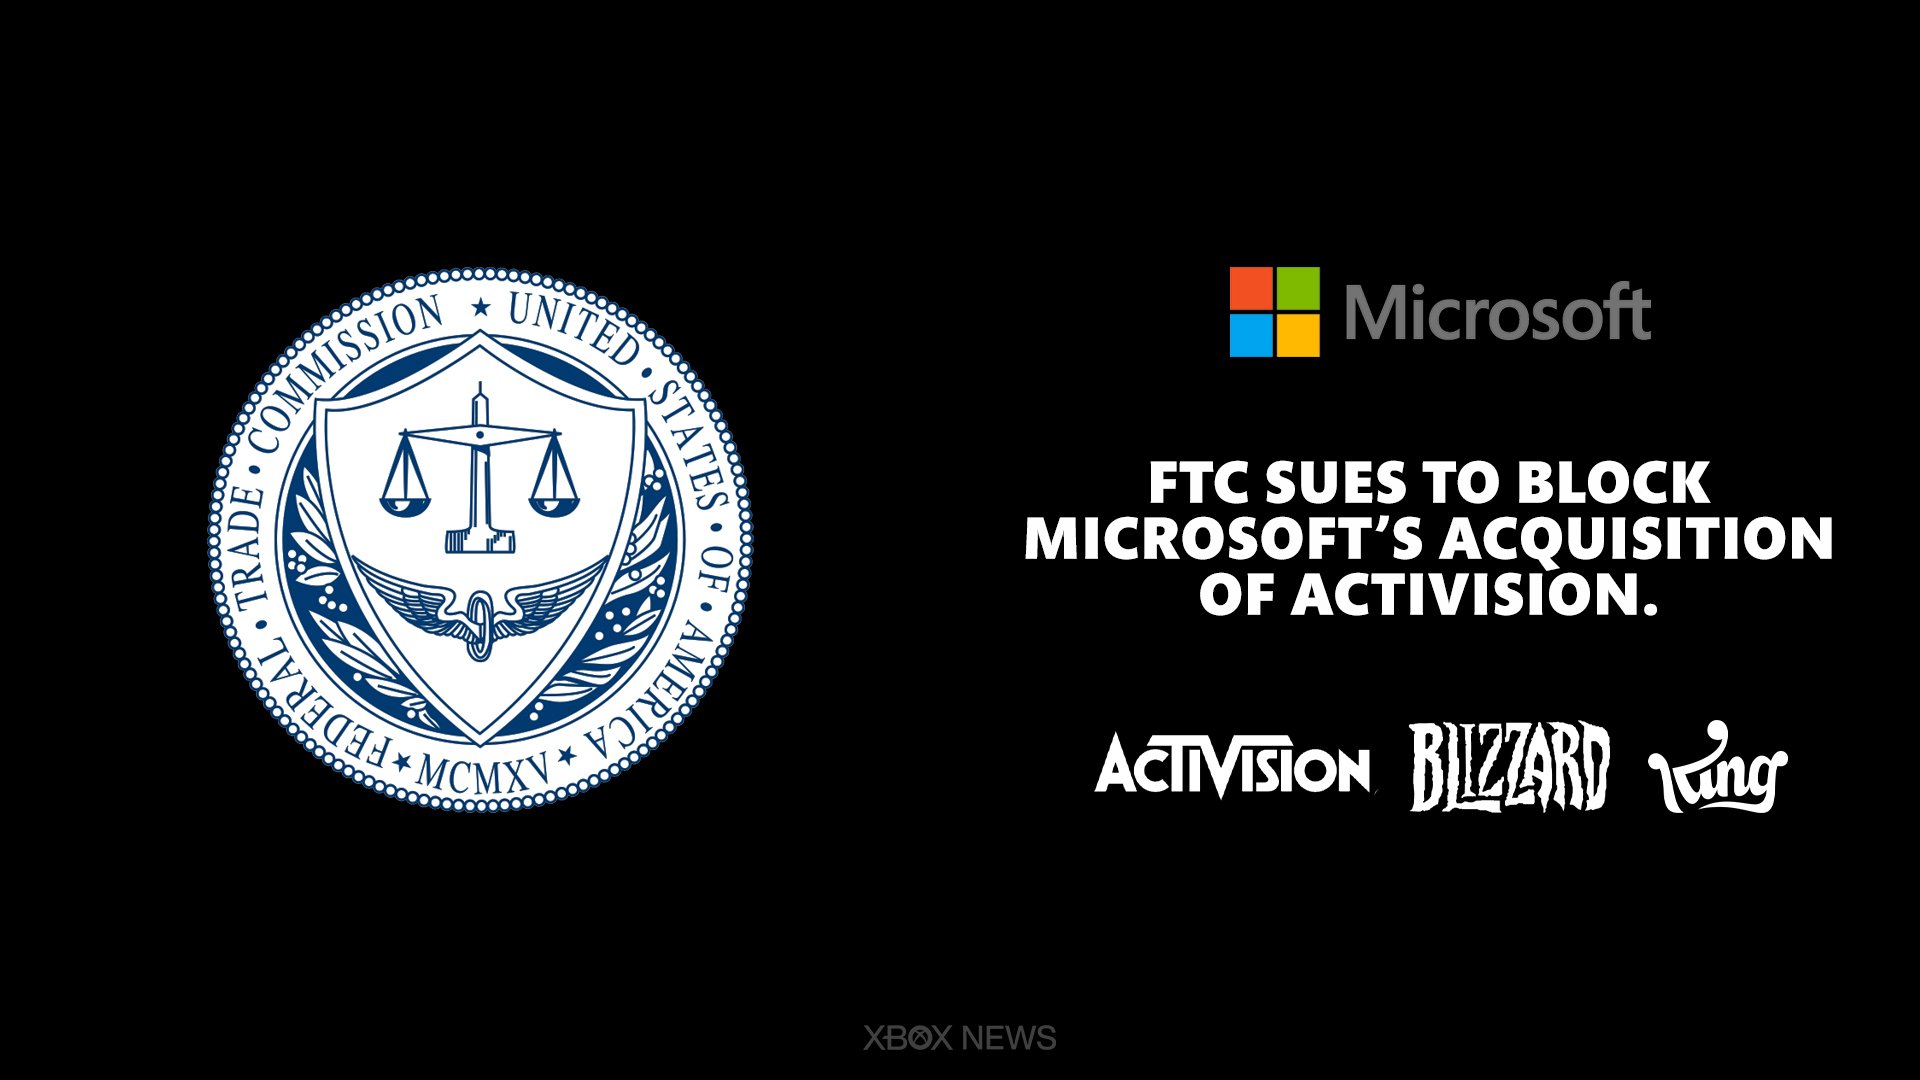 The FTC is suing Microsoft to block Activision Blizzard takeover